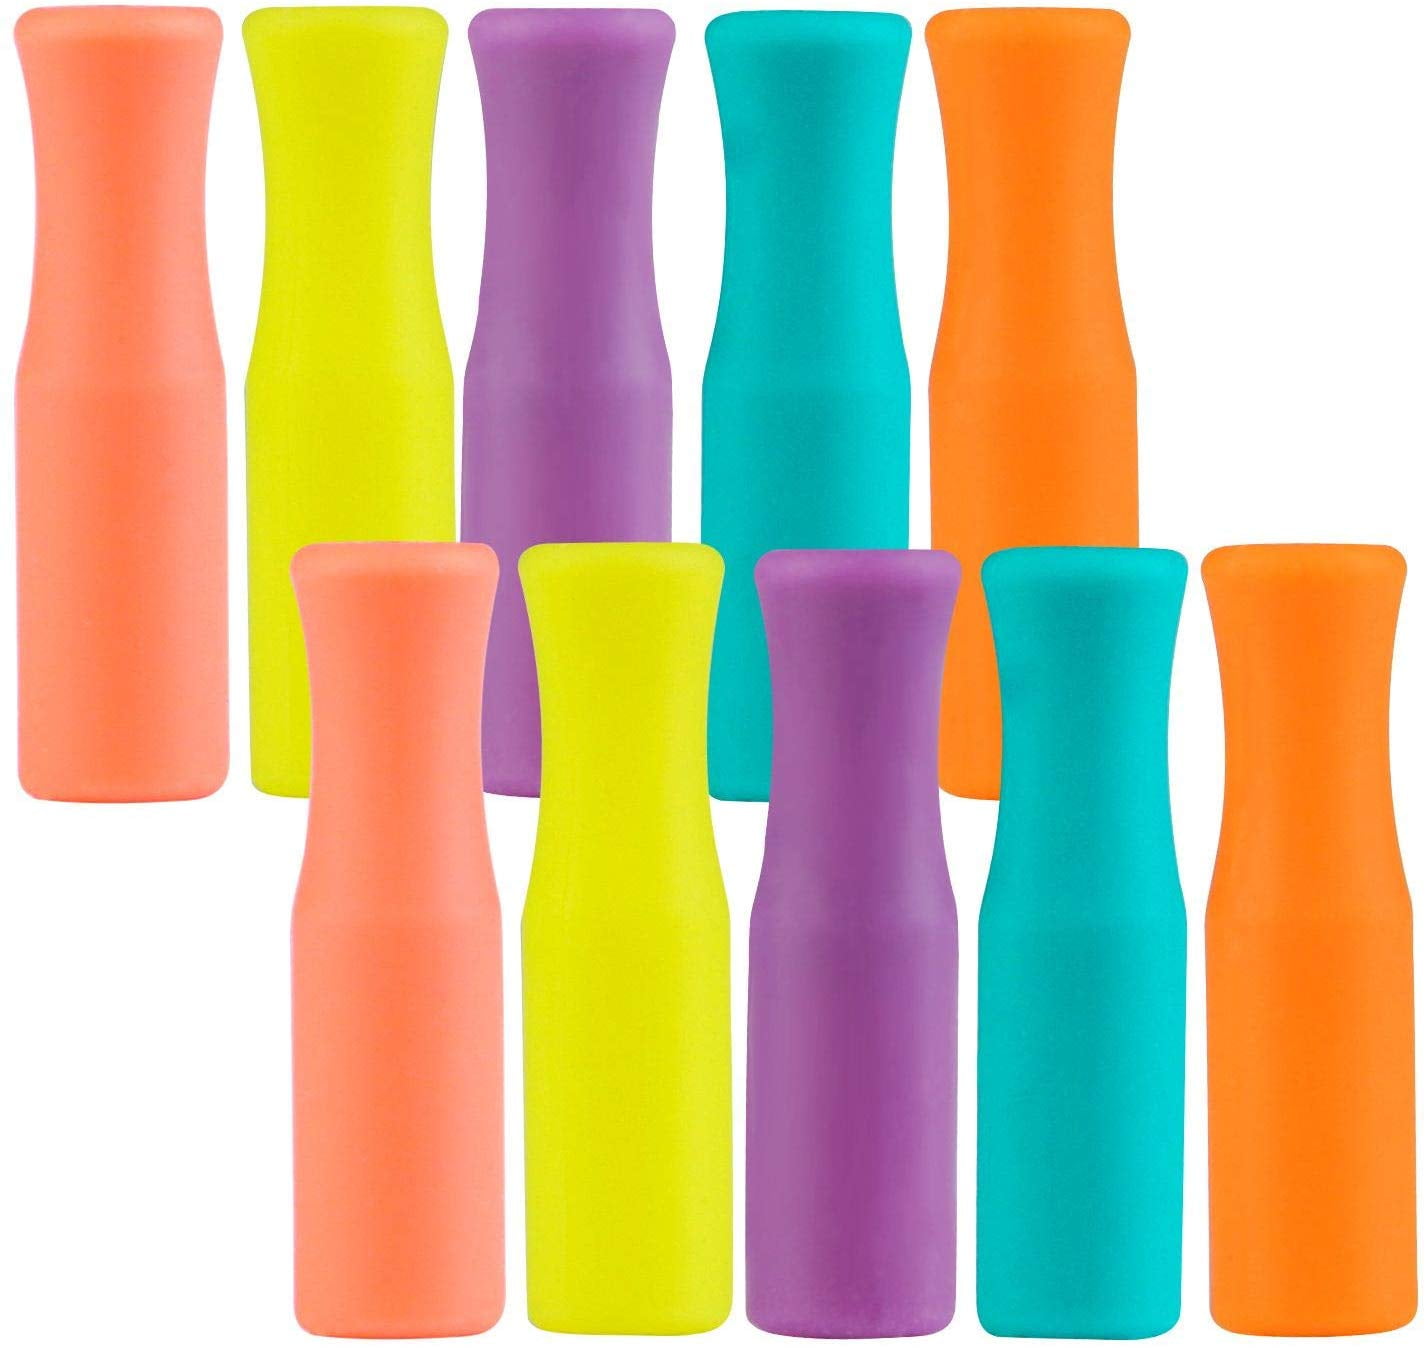 Kereda 10 Pack Straw Covers Multicoloredֱ Silicone Straw Tips for Metal Straws 